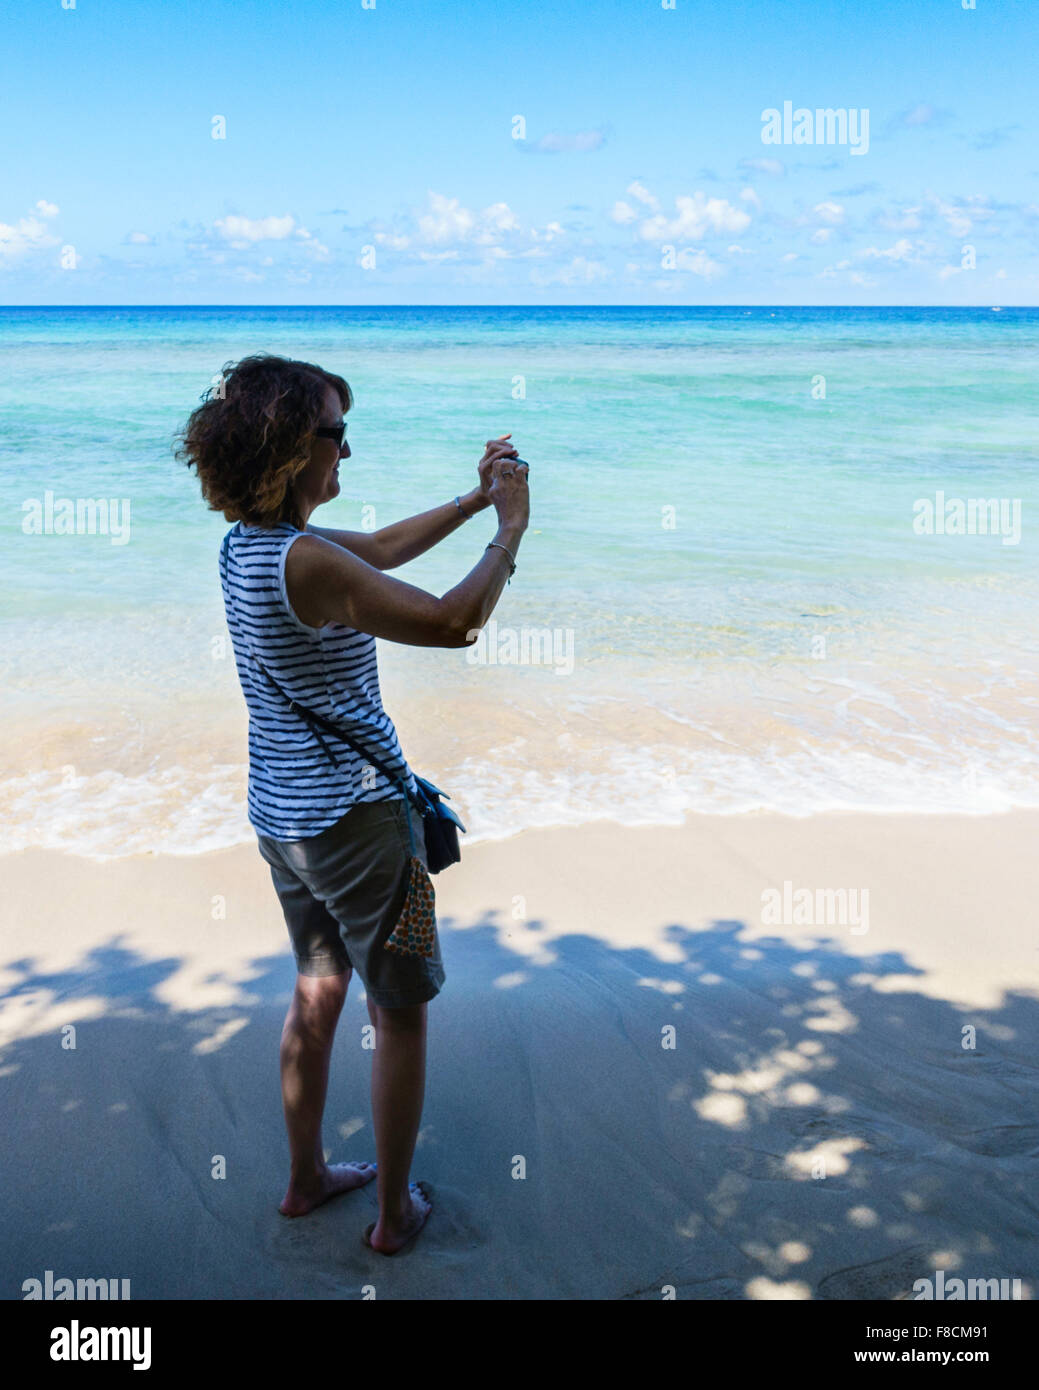 A 50 year old woman photographs the beauty of the Caribbean in St. Croix, U.S. Virgin Islands. Stock Photo